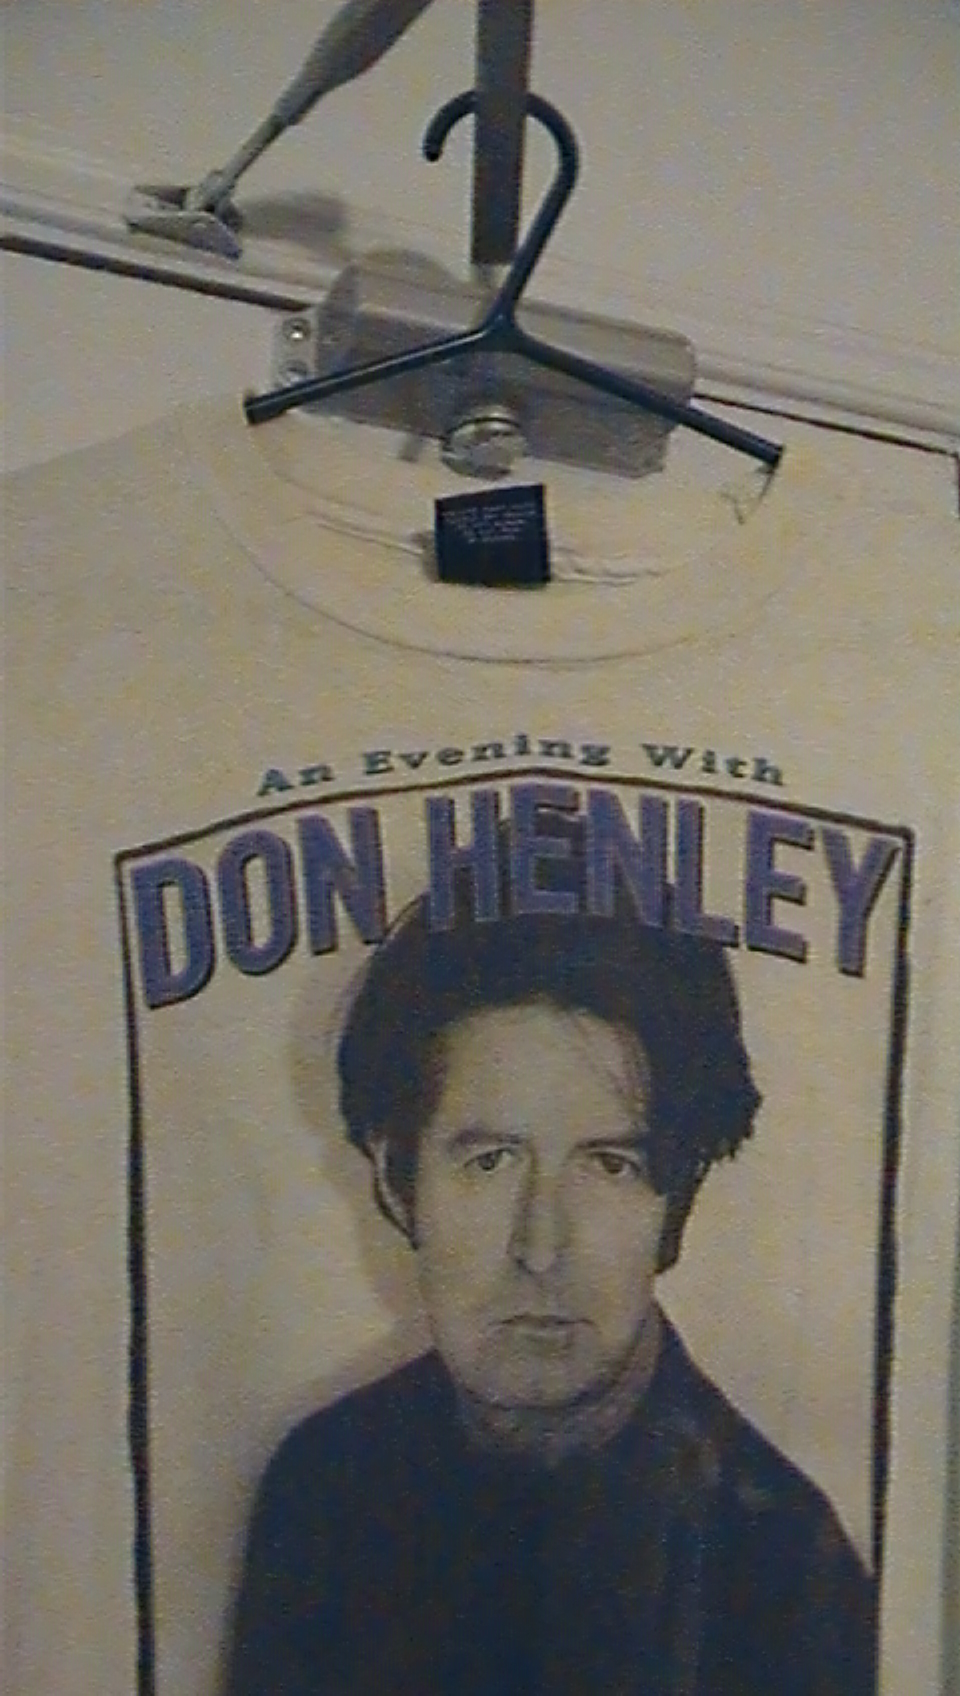 Happy 74th birthday Don Henley! and yes, this shirt is almost as old as he is! lol 